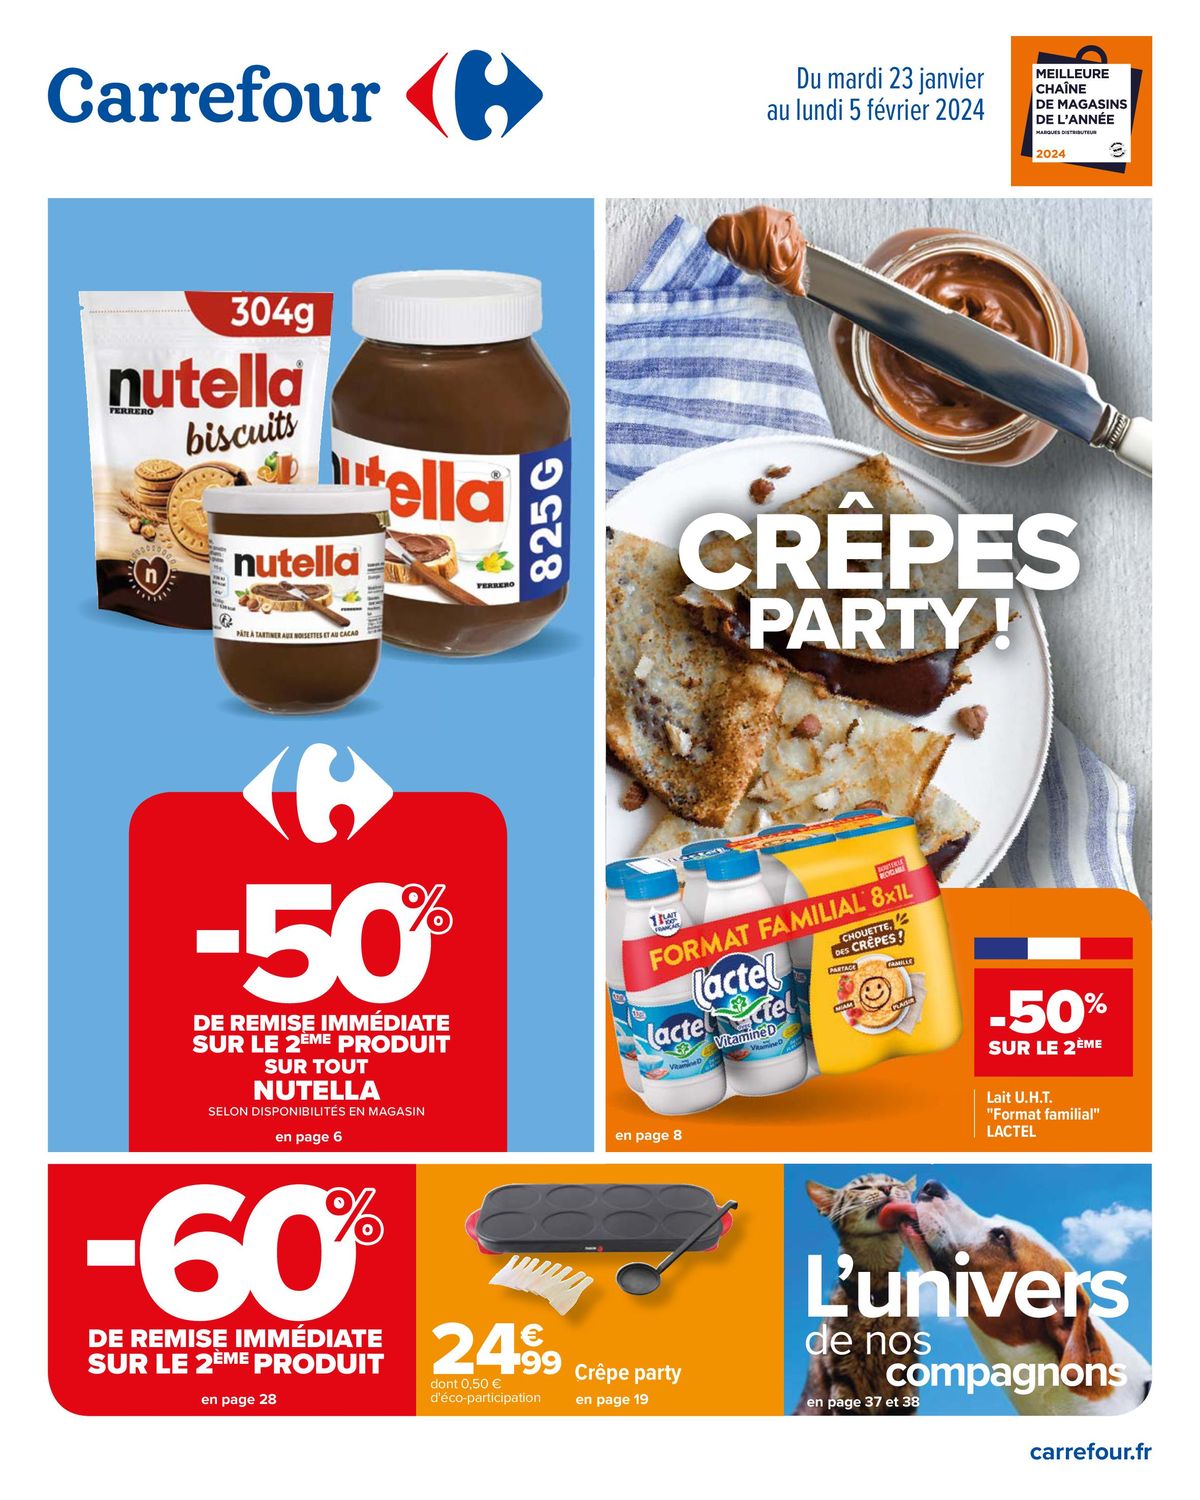 Catalogue Crêpes Party !, page 00001